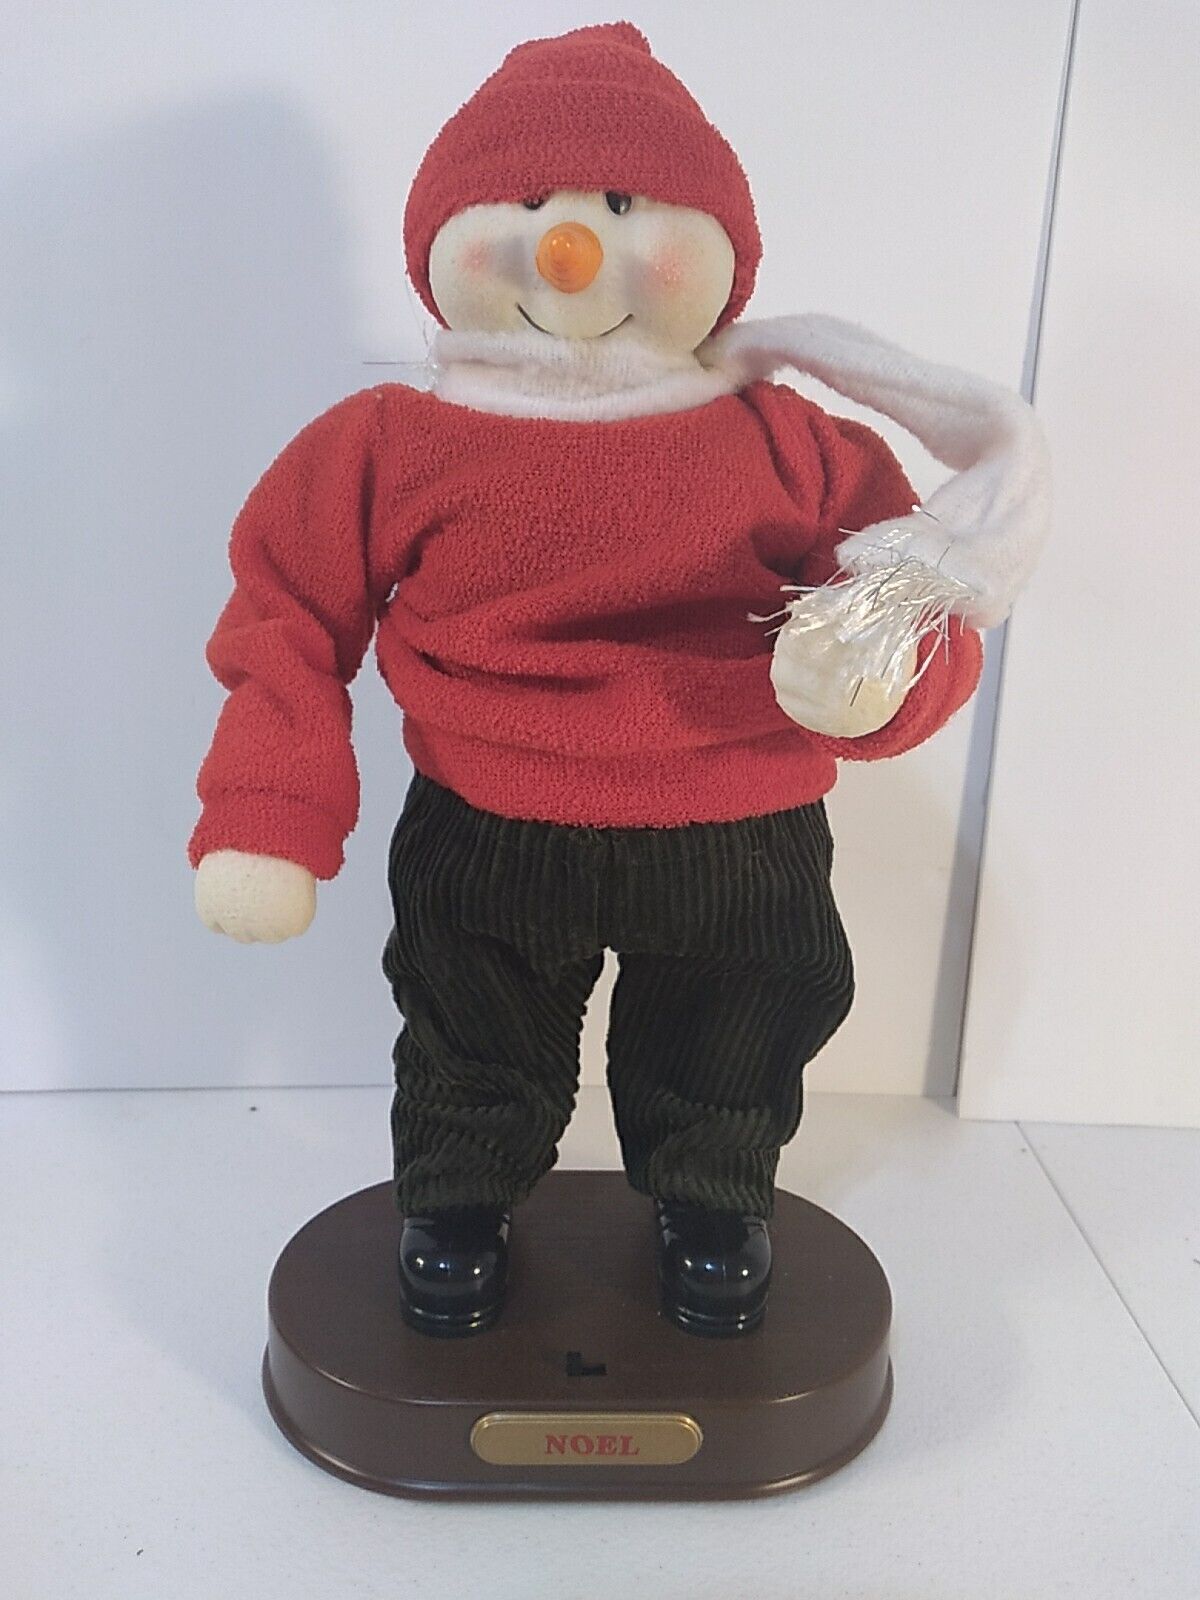 Snowman  Dancing And Sing Frost The Snowman 13 Inches Tall Red Hat And Sweater 